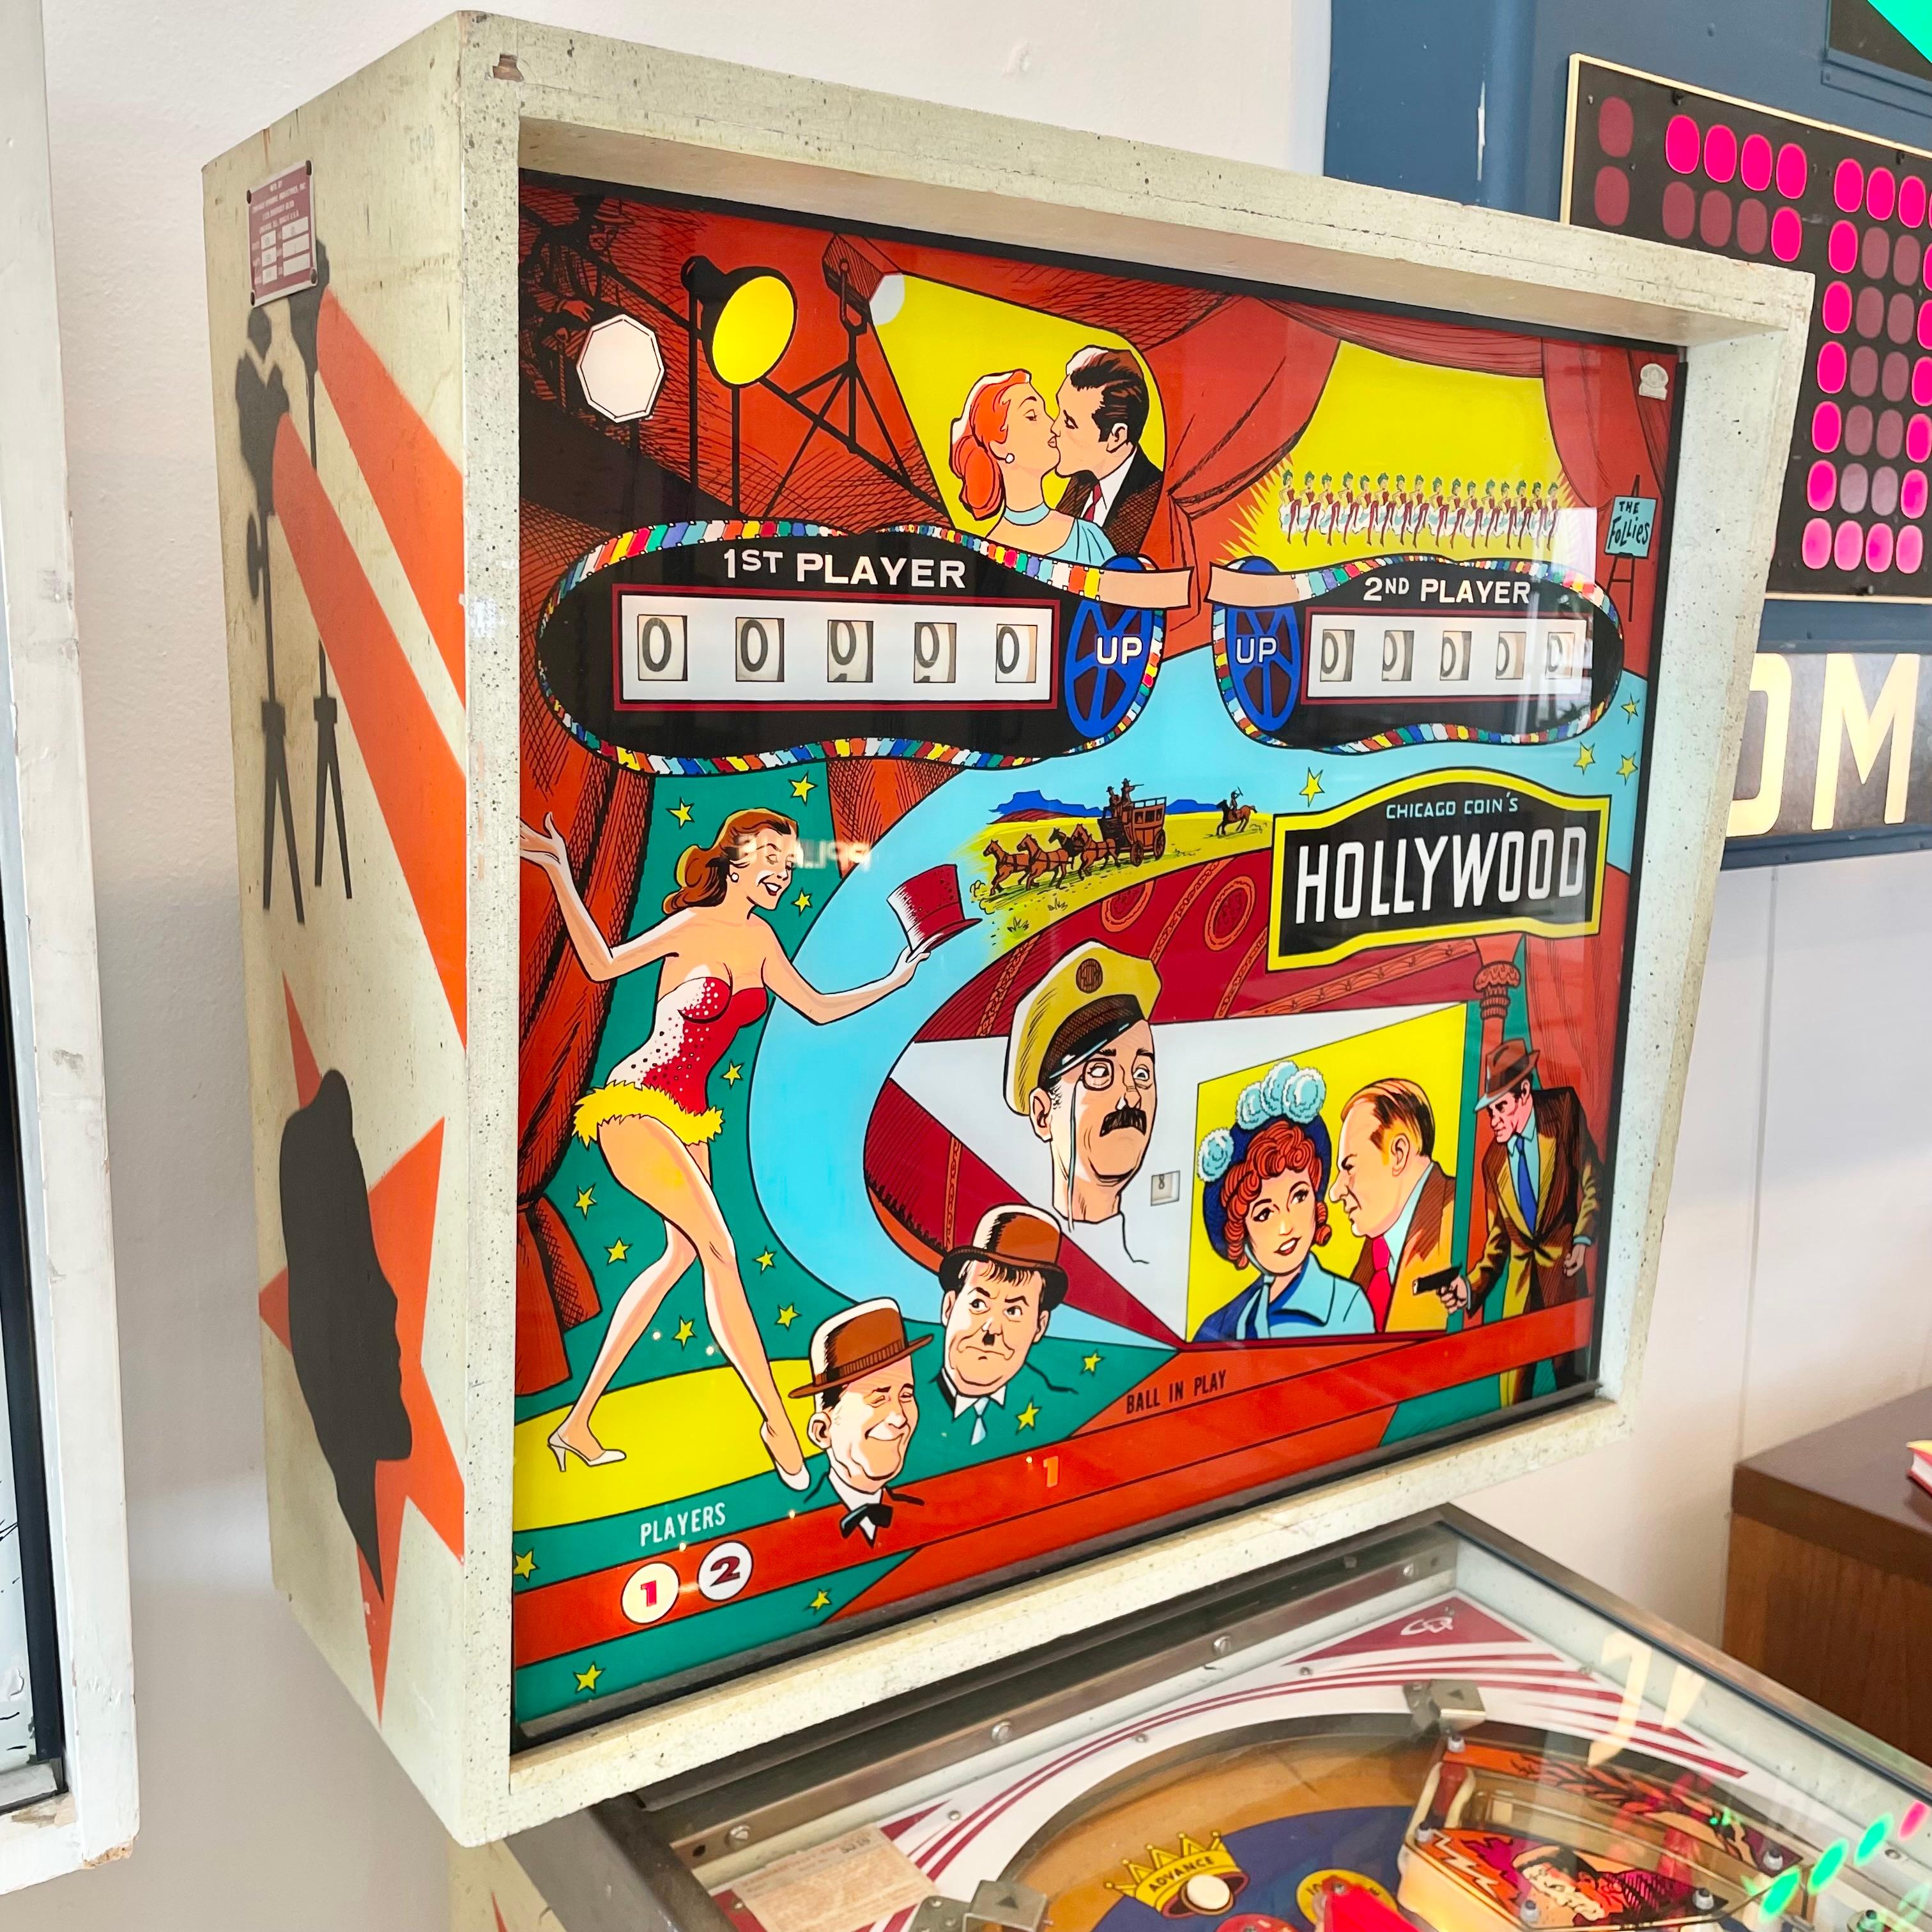 Vintage 'HOLLYWOOD' pinball machine from 1976. Made by Chicago Coin Machine Manufacturing Company and designed by Albin Peters, Jerry Koci and Wendell McAdams. In excellent working condition. Great visuals and sounds. Extremely fast paced game speed